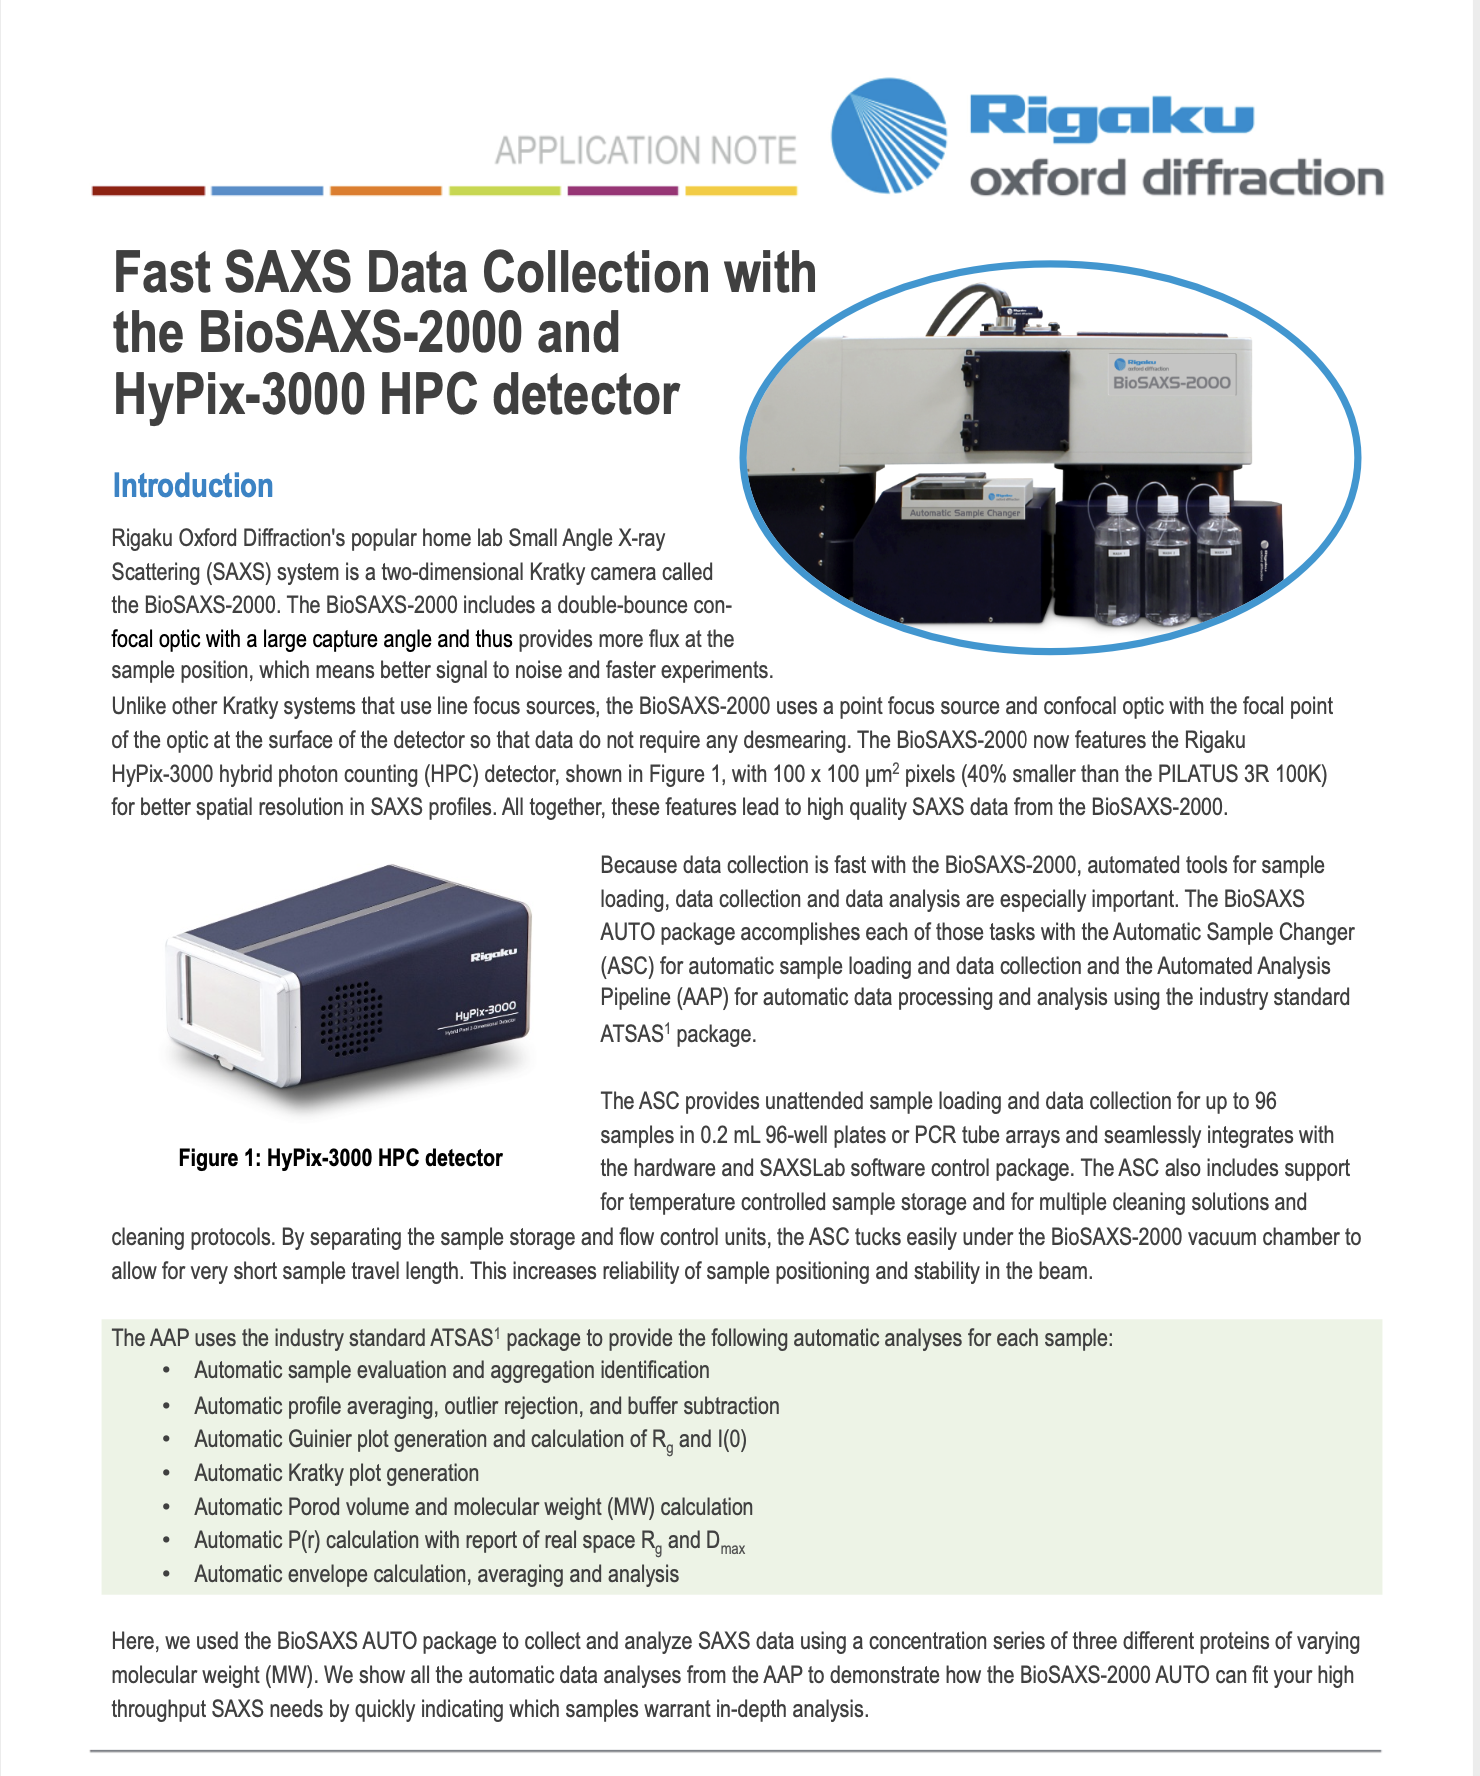 Fast SAXS Data Collection with the BioSAXS-2000 and HyPix-3000 HPC detector